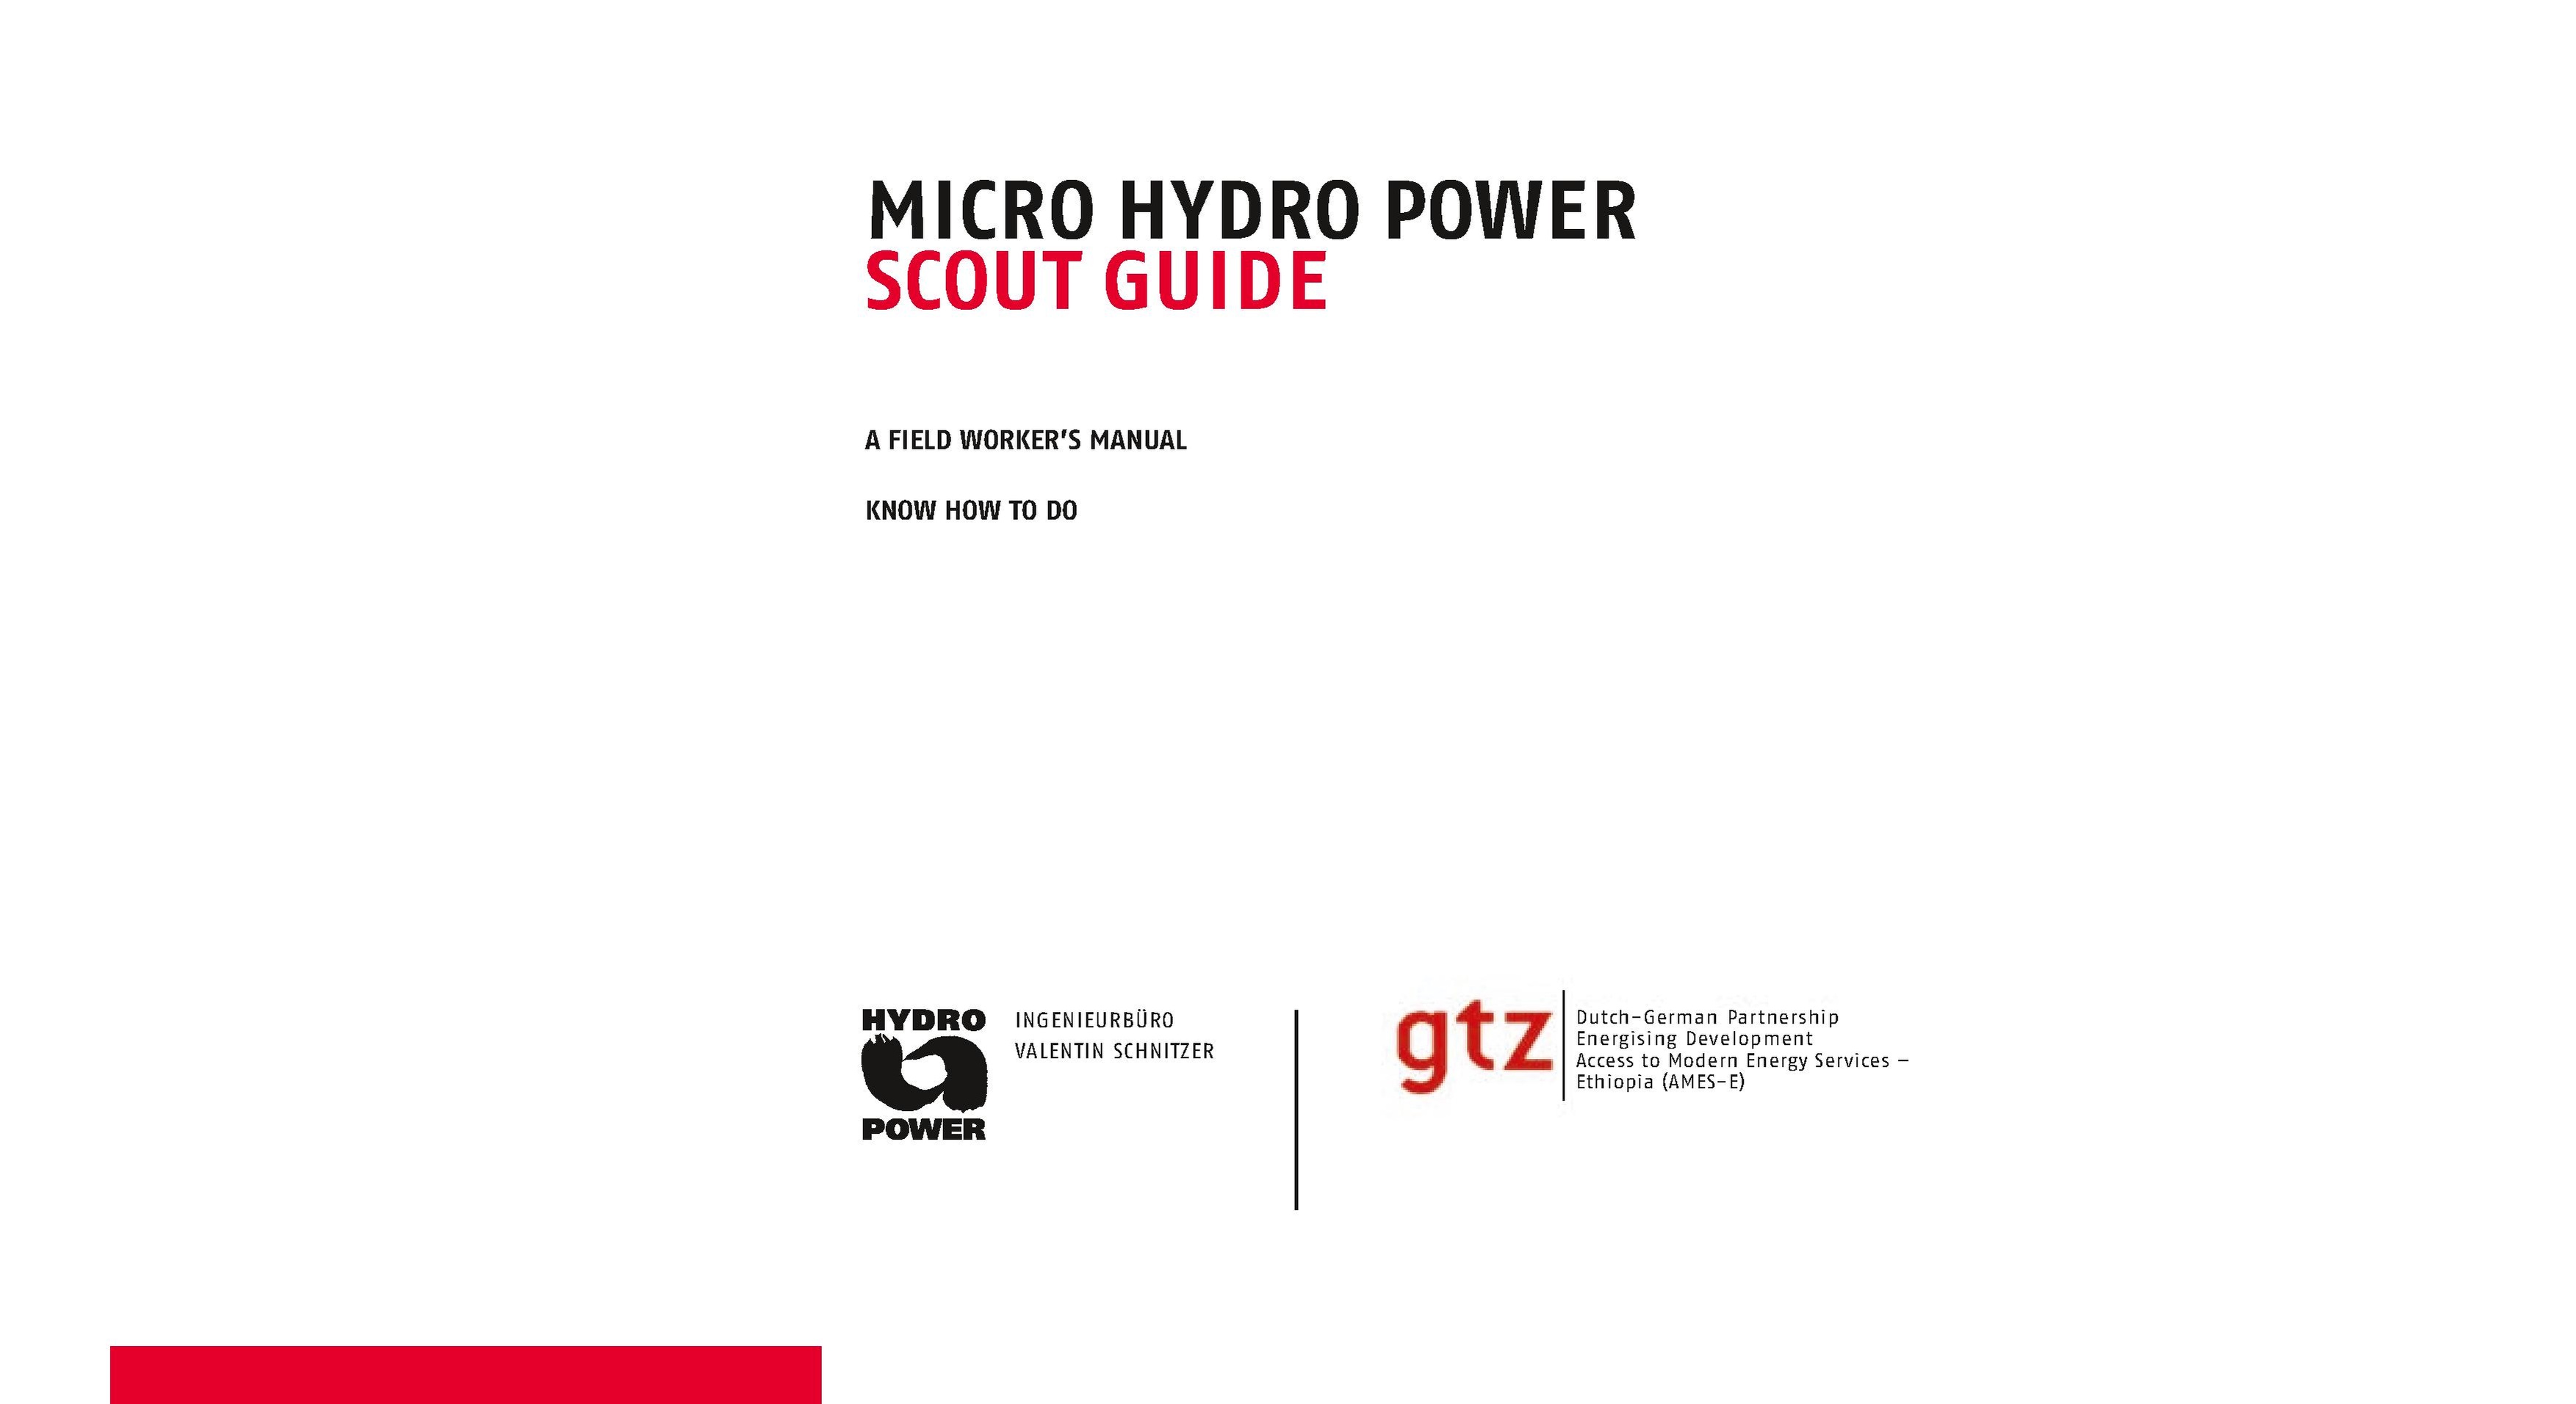 Hydro scout guide ET may10.pdf